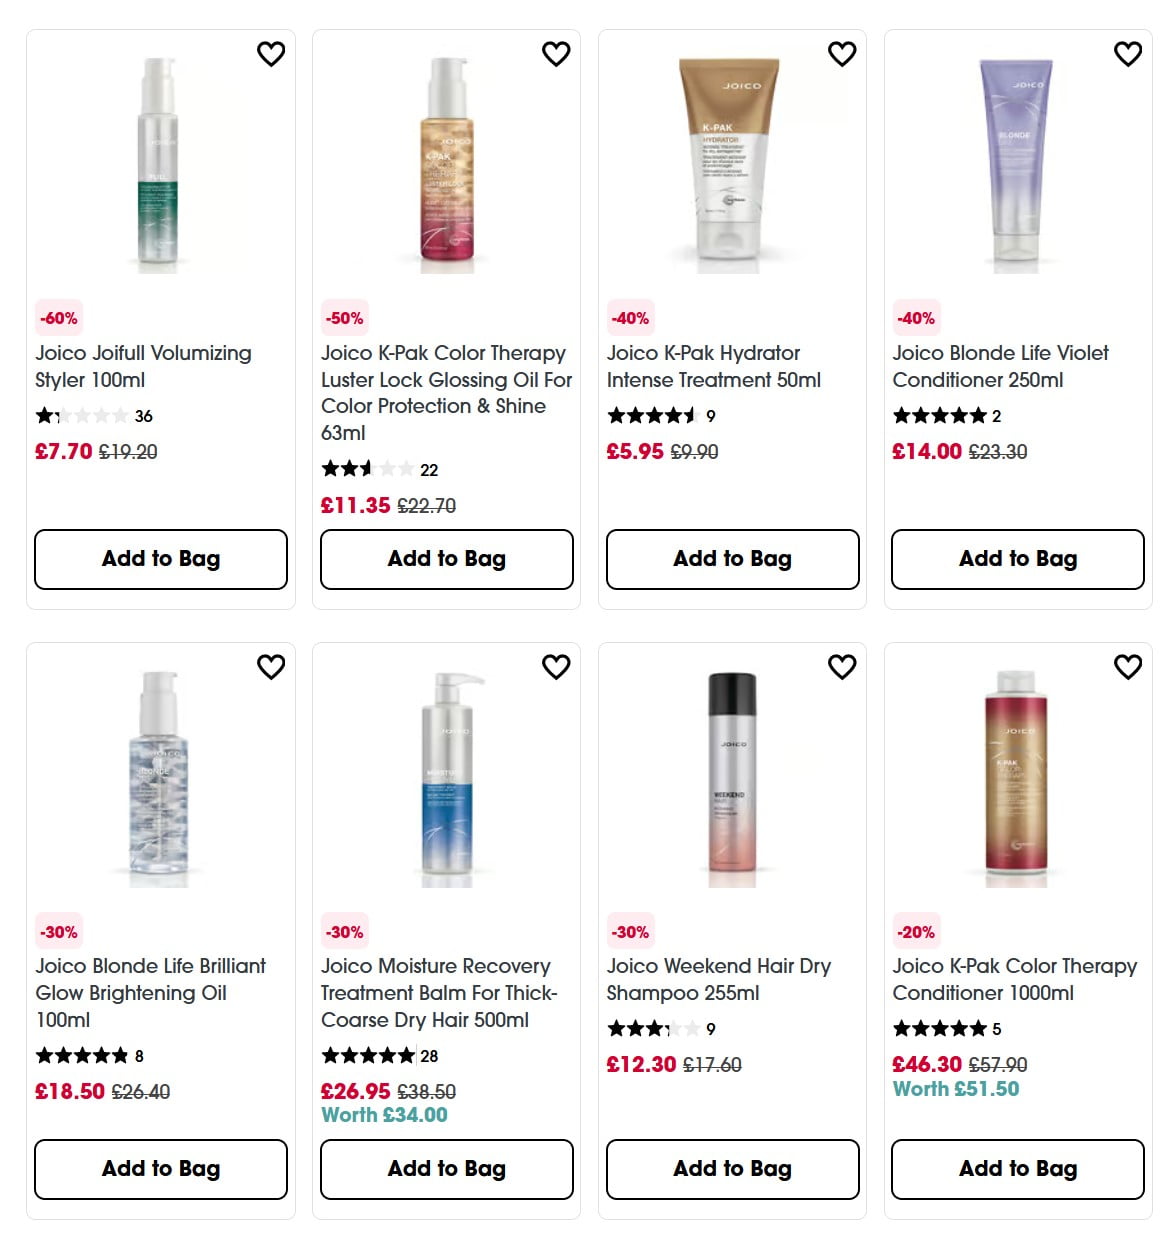 Up to 60% off Joico at Sephora UK